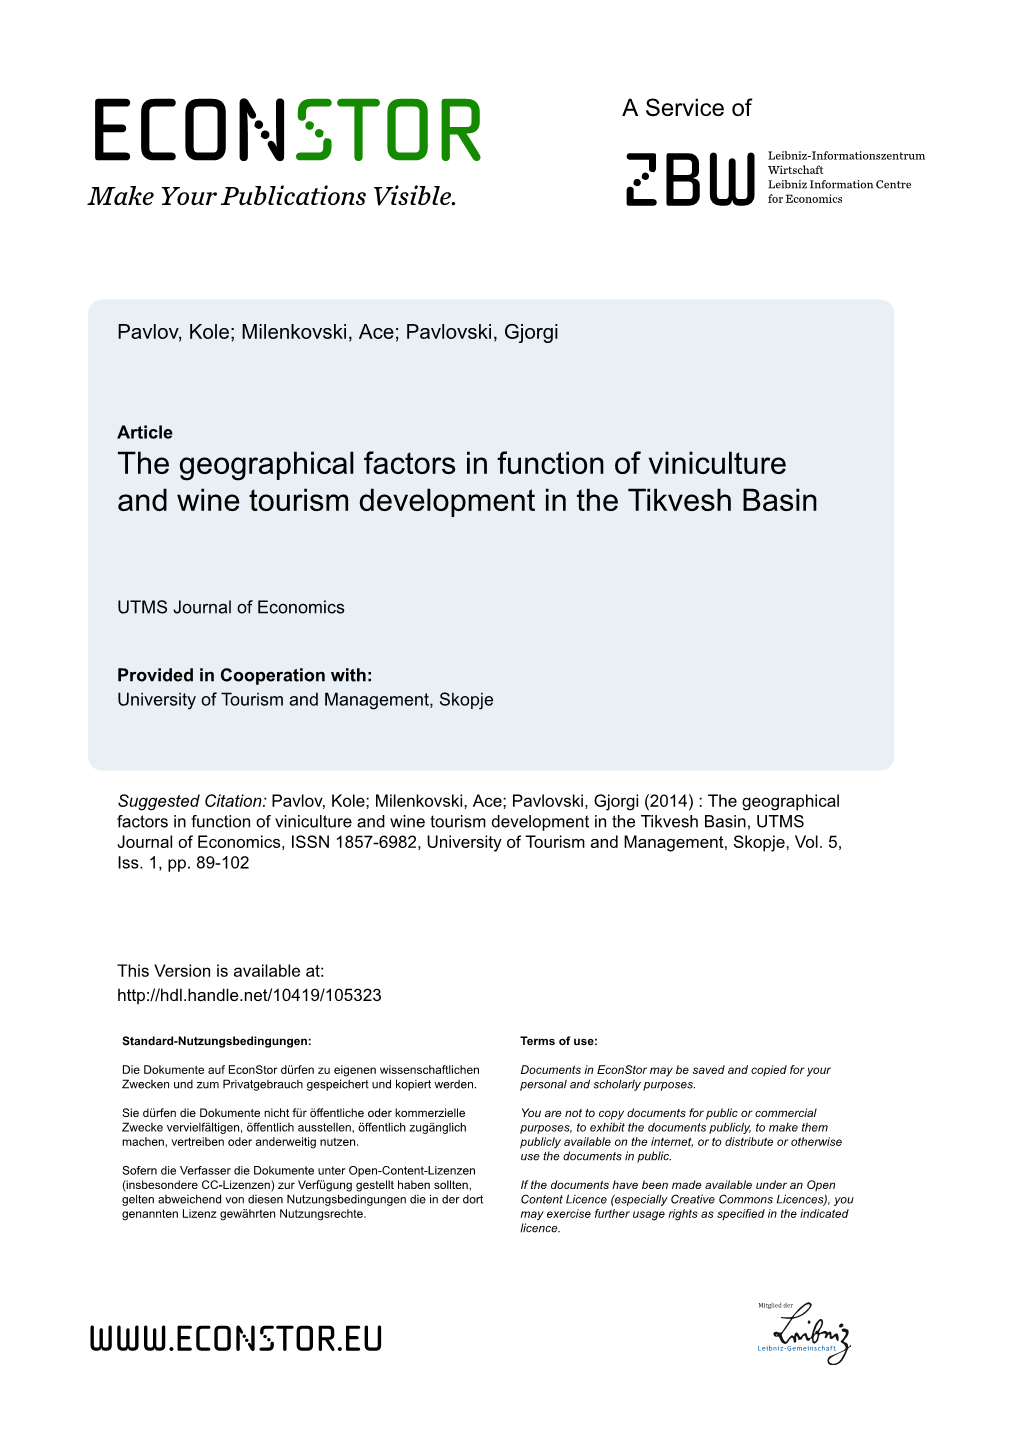 The Geographical Factors in Function of Viniculture and Wine Tourism Development in the Tikvesh Basin